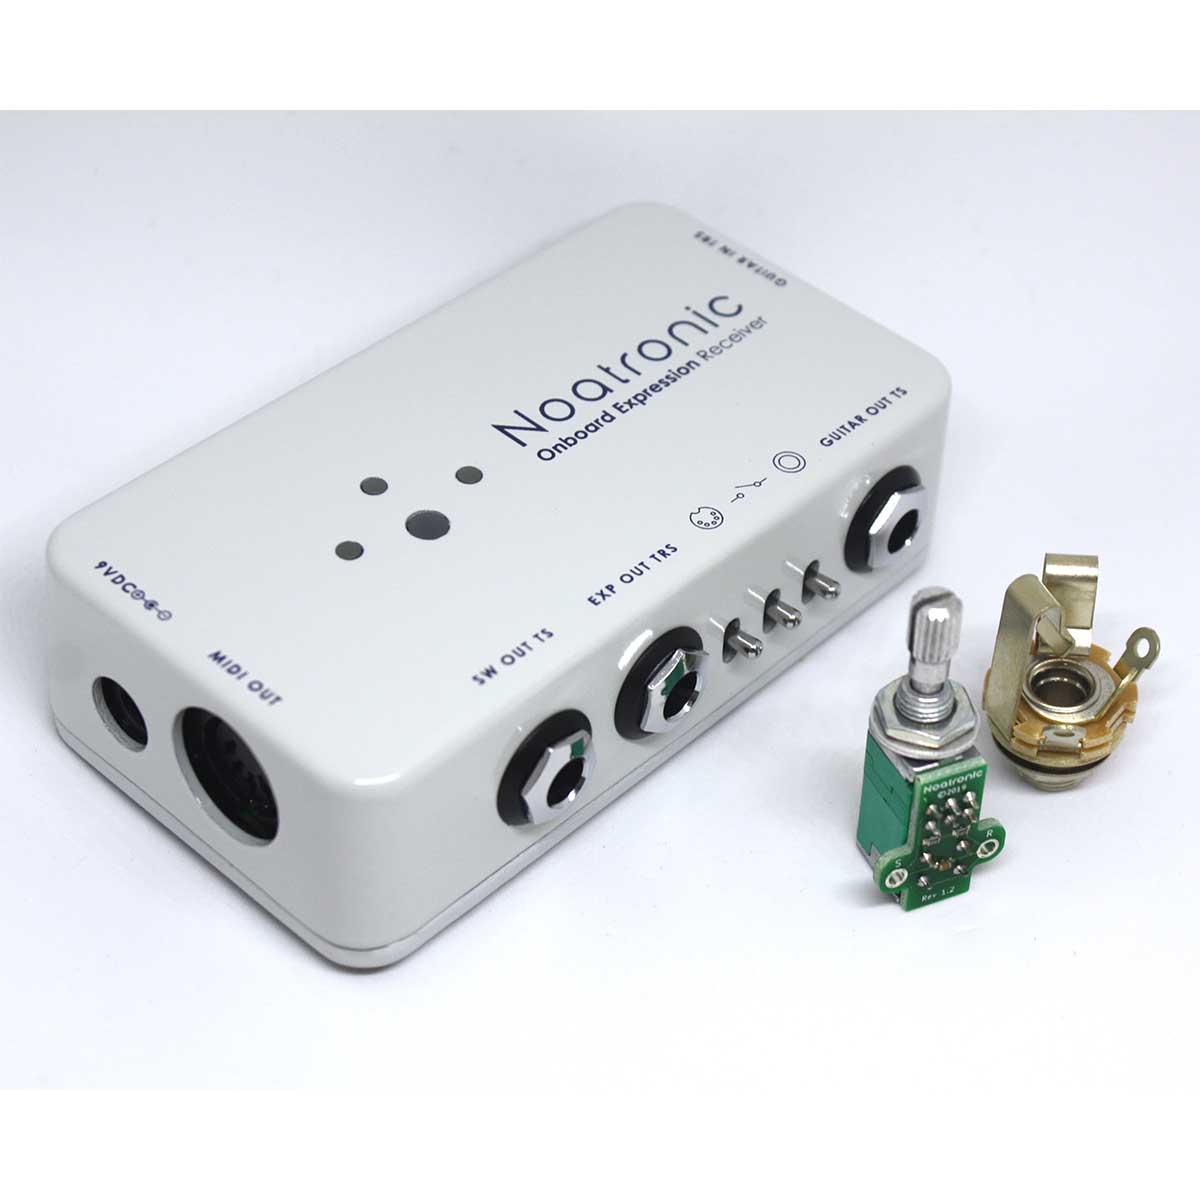 Noatronic Onboard Guitar Expression System for Fender Style Guitars